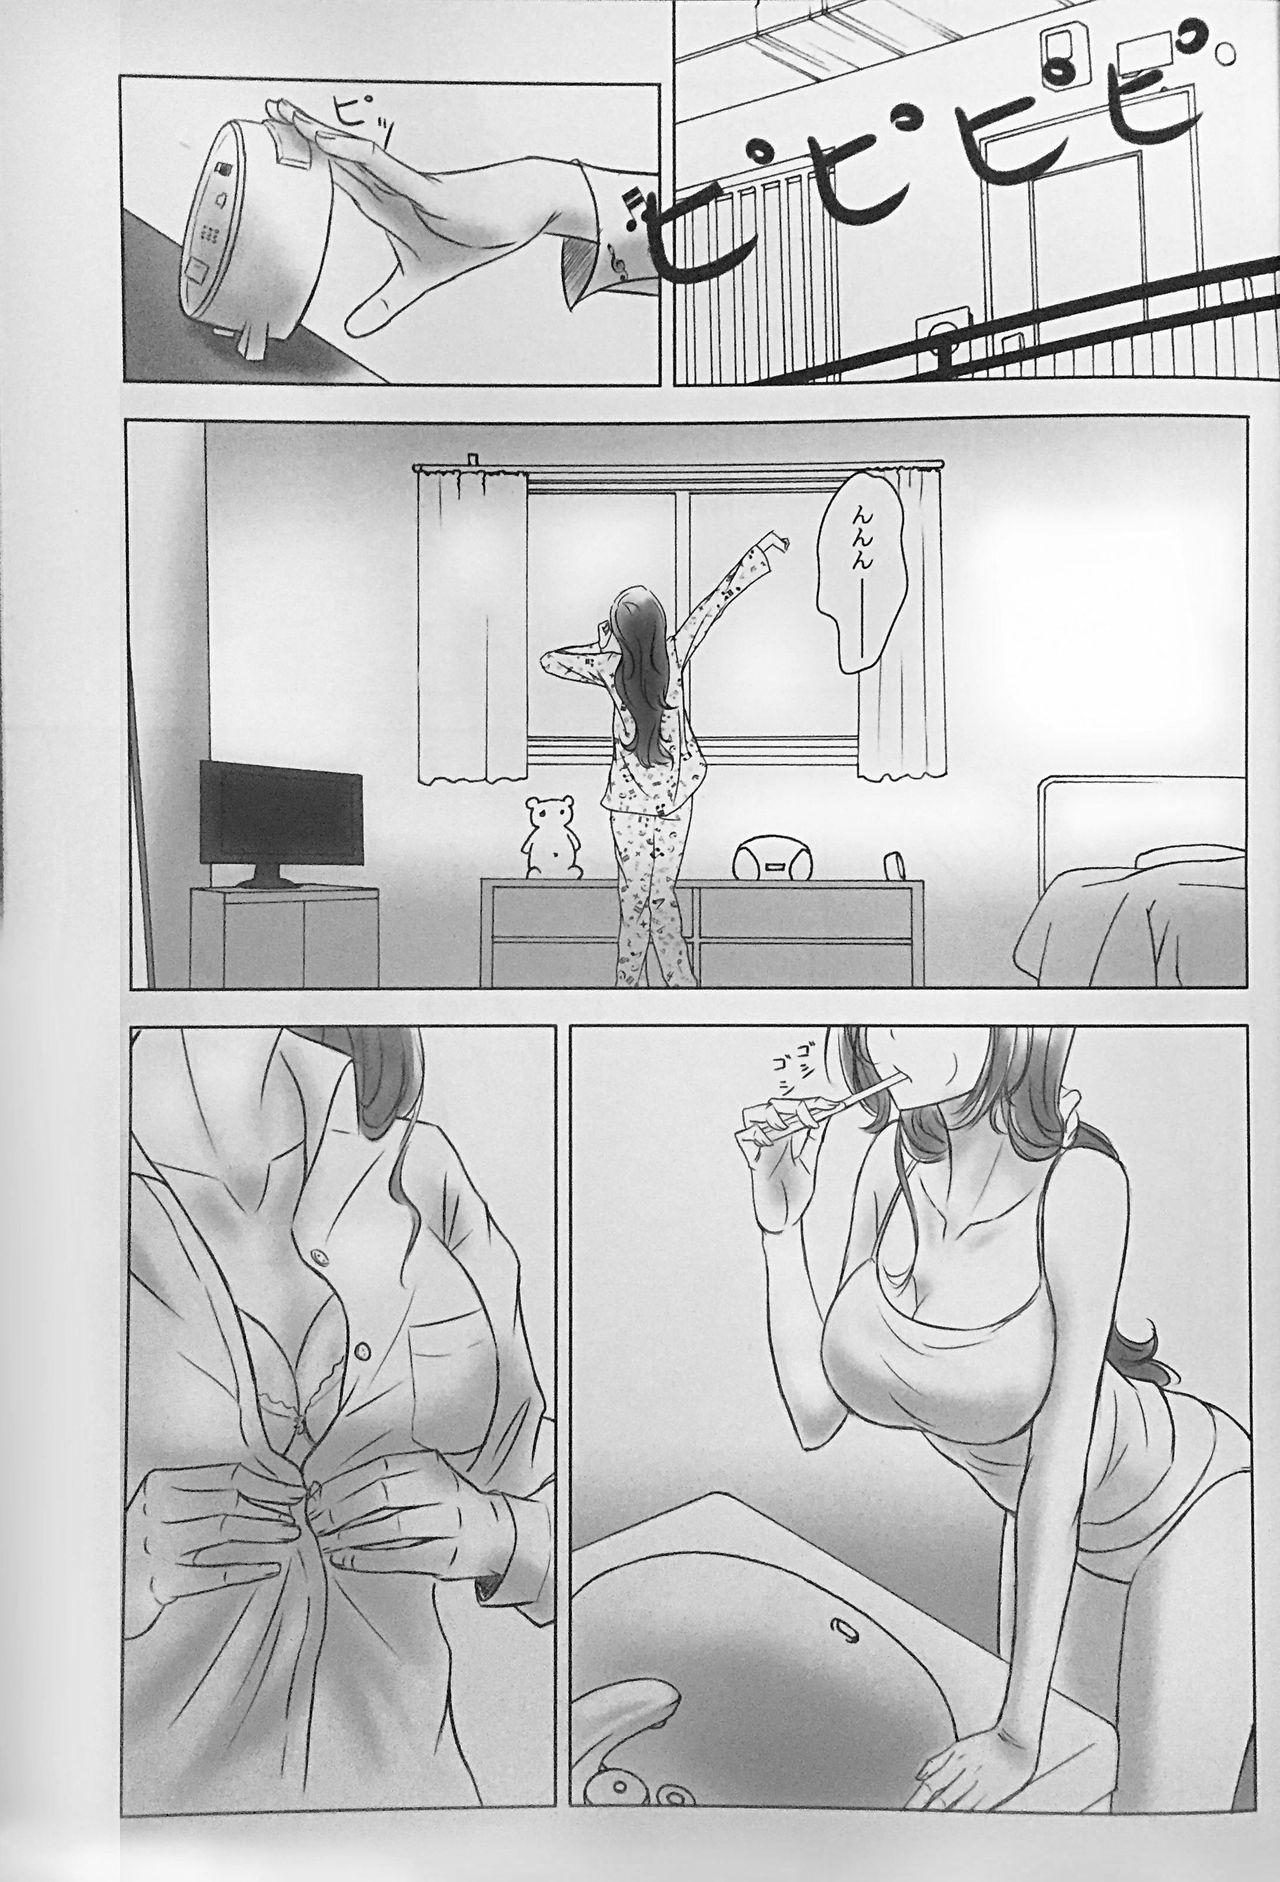 Oral Sex Two Hearts You're not alone #2 - Bleach Viet Nam - Page 3